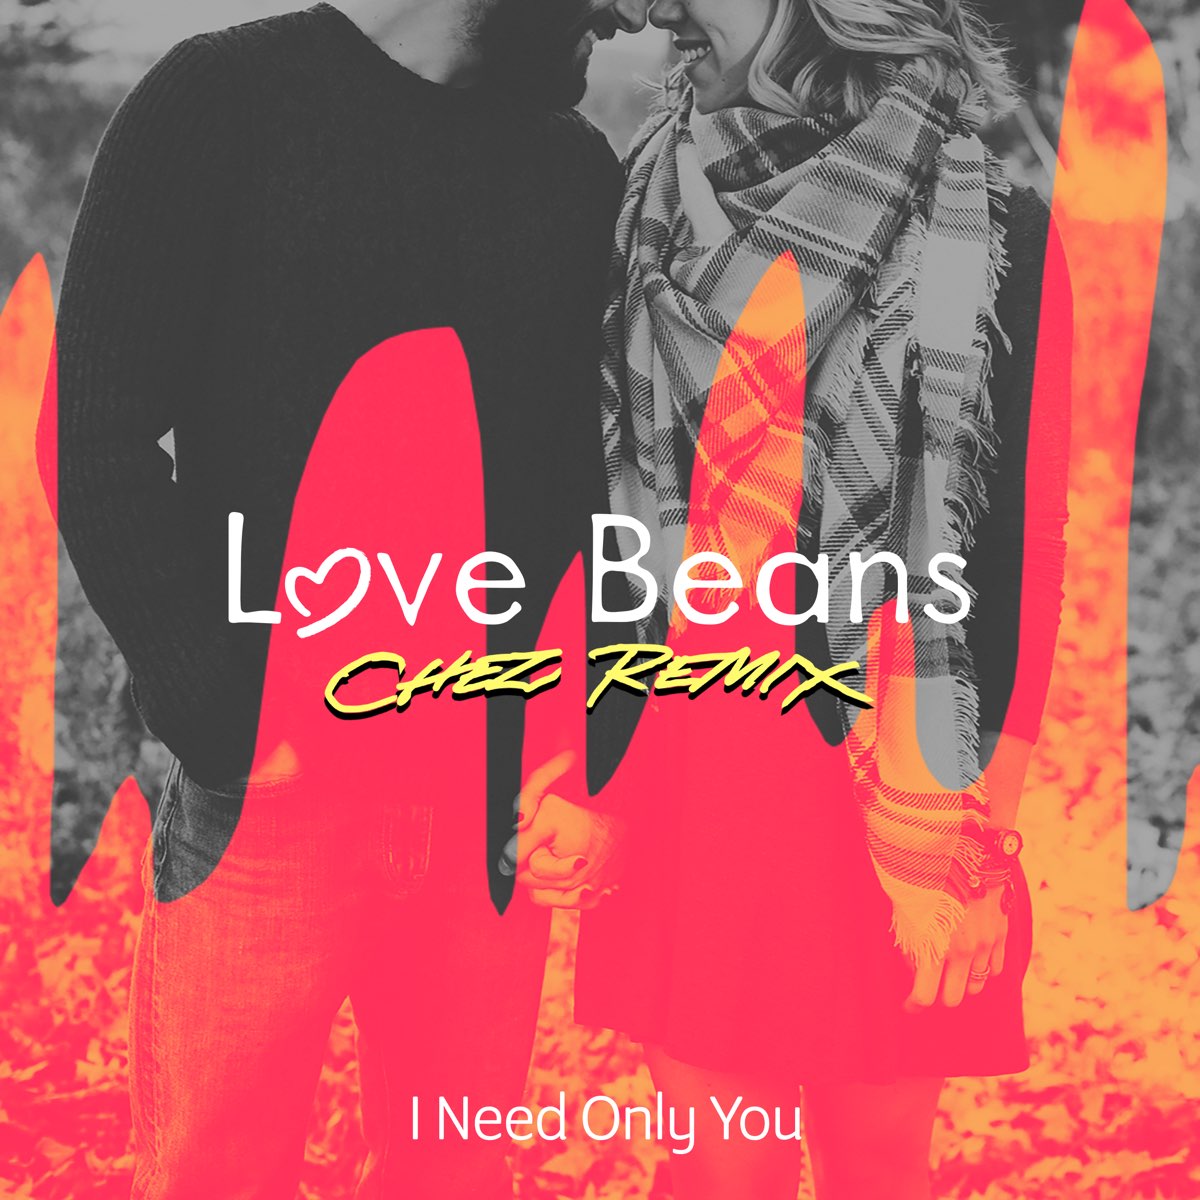 Love Beans i need only you. Only you, only me. I need you Love песня. I Love only you.